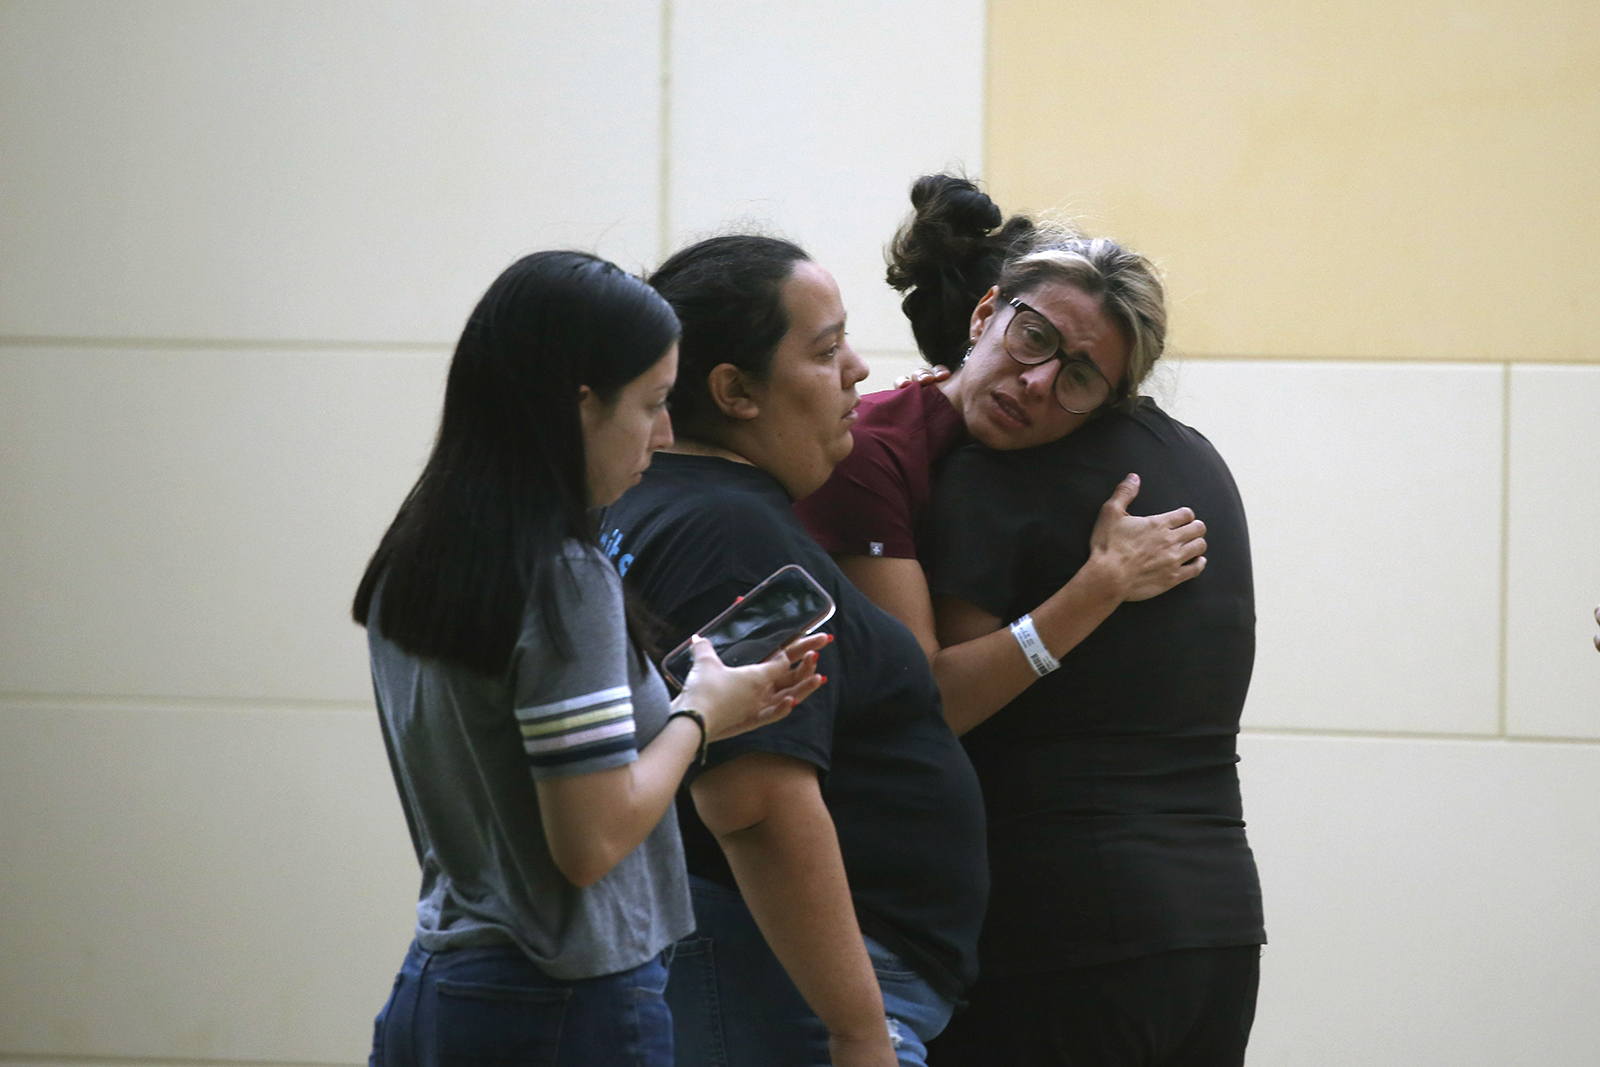 People react outside the Civic Center following a deadly school shooting at Robb Elementary School in Uvalde, Texas Tuesday, May 24, 2022. (AP Photo/Dario Lopez-Mills)